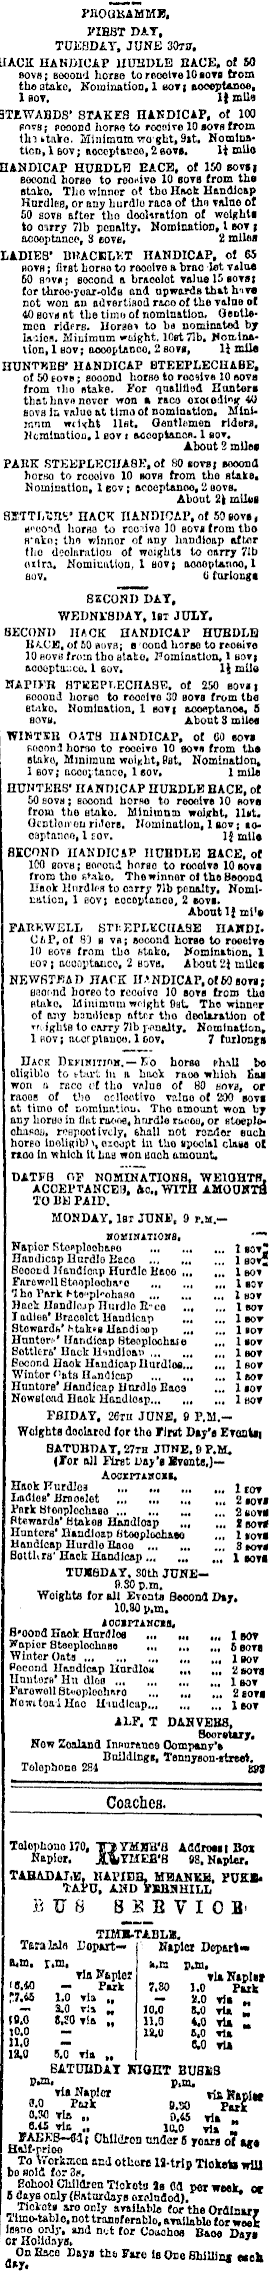 Papers Past Newspapers Hawke S Bay Herald 22 May 1903 Page 4 Advertisements Column 7